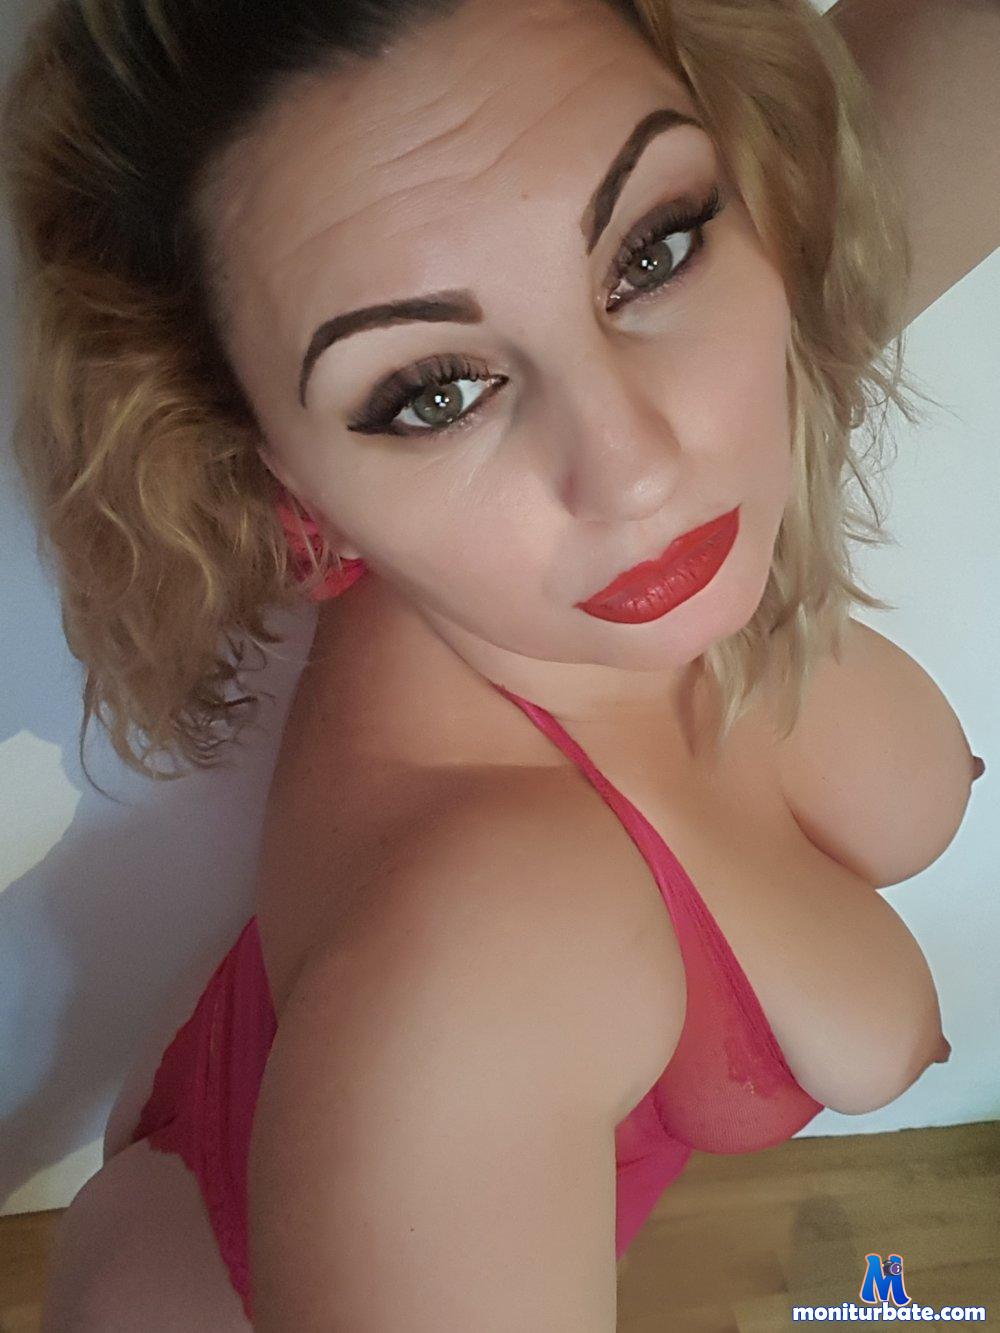 jdream4u Stripchat performer tag Language Spanish Speaking girls body Type Curvy hair Color Blonde private Price Thirty Two Sixty do Dance do Shower do Play Games do Oil do Ohmibod do Squirt do Cream Pie do Striptease do Fingering specifics Big Ass specifics Big Tits auto Tag Hd do Talk do Topless do Twerk do Sex Toys do Anal do Blowjob do Doggy Style tag Language Romanian do Smoking hair Color Black auto Tag Recordable Private do Titty Fuck sexting age Milf small Audience auto Tag P2 P do Erotic Dance do Oil Show do Anal Toys do Gagging do Handjob do Flashing do Double Penetration do Ejaculation auto Tag Recordable Public